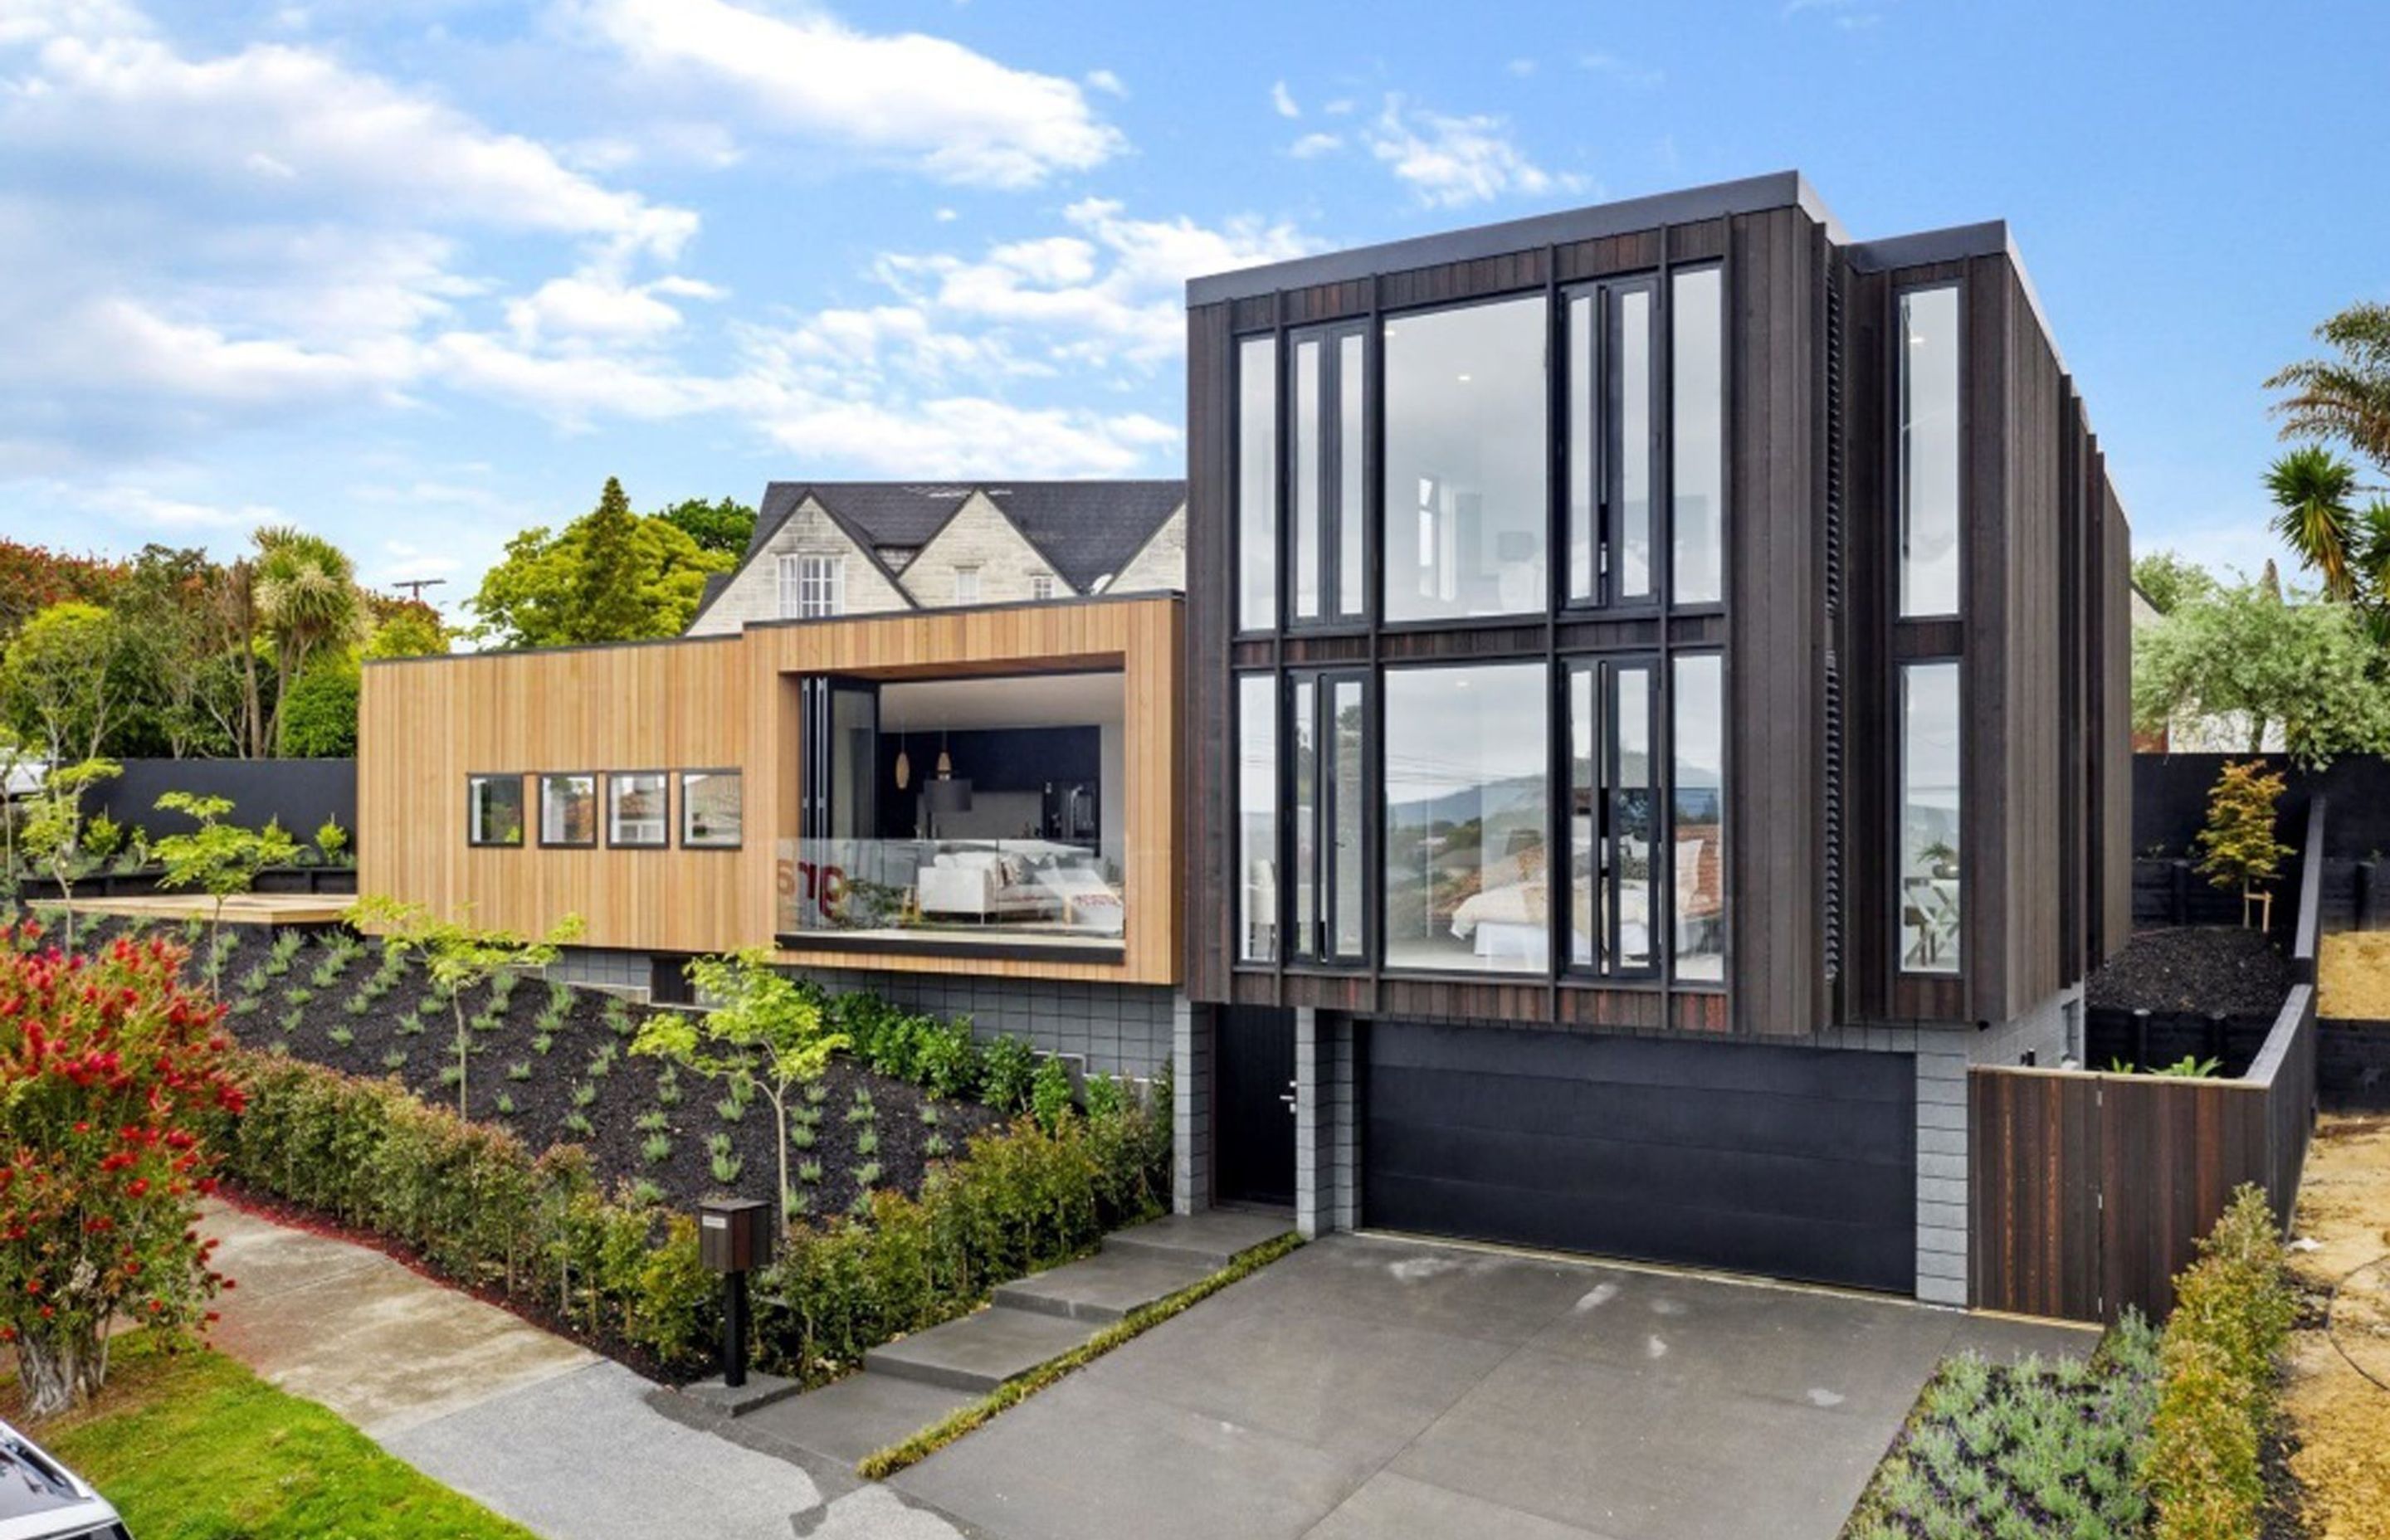 Located in one of Auckland’s more sought after streets, this family home features four bedrooms, four bathrooms, open plan living and front, rear and side decks to take advantage of the view.